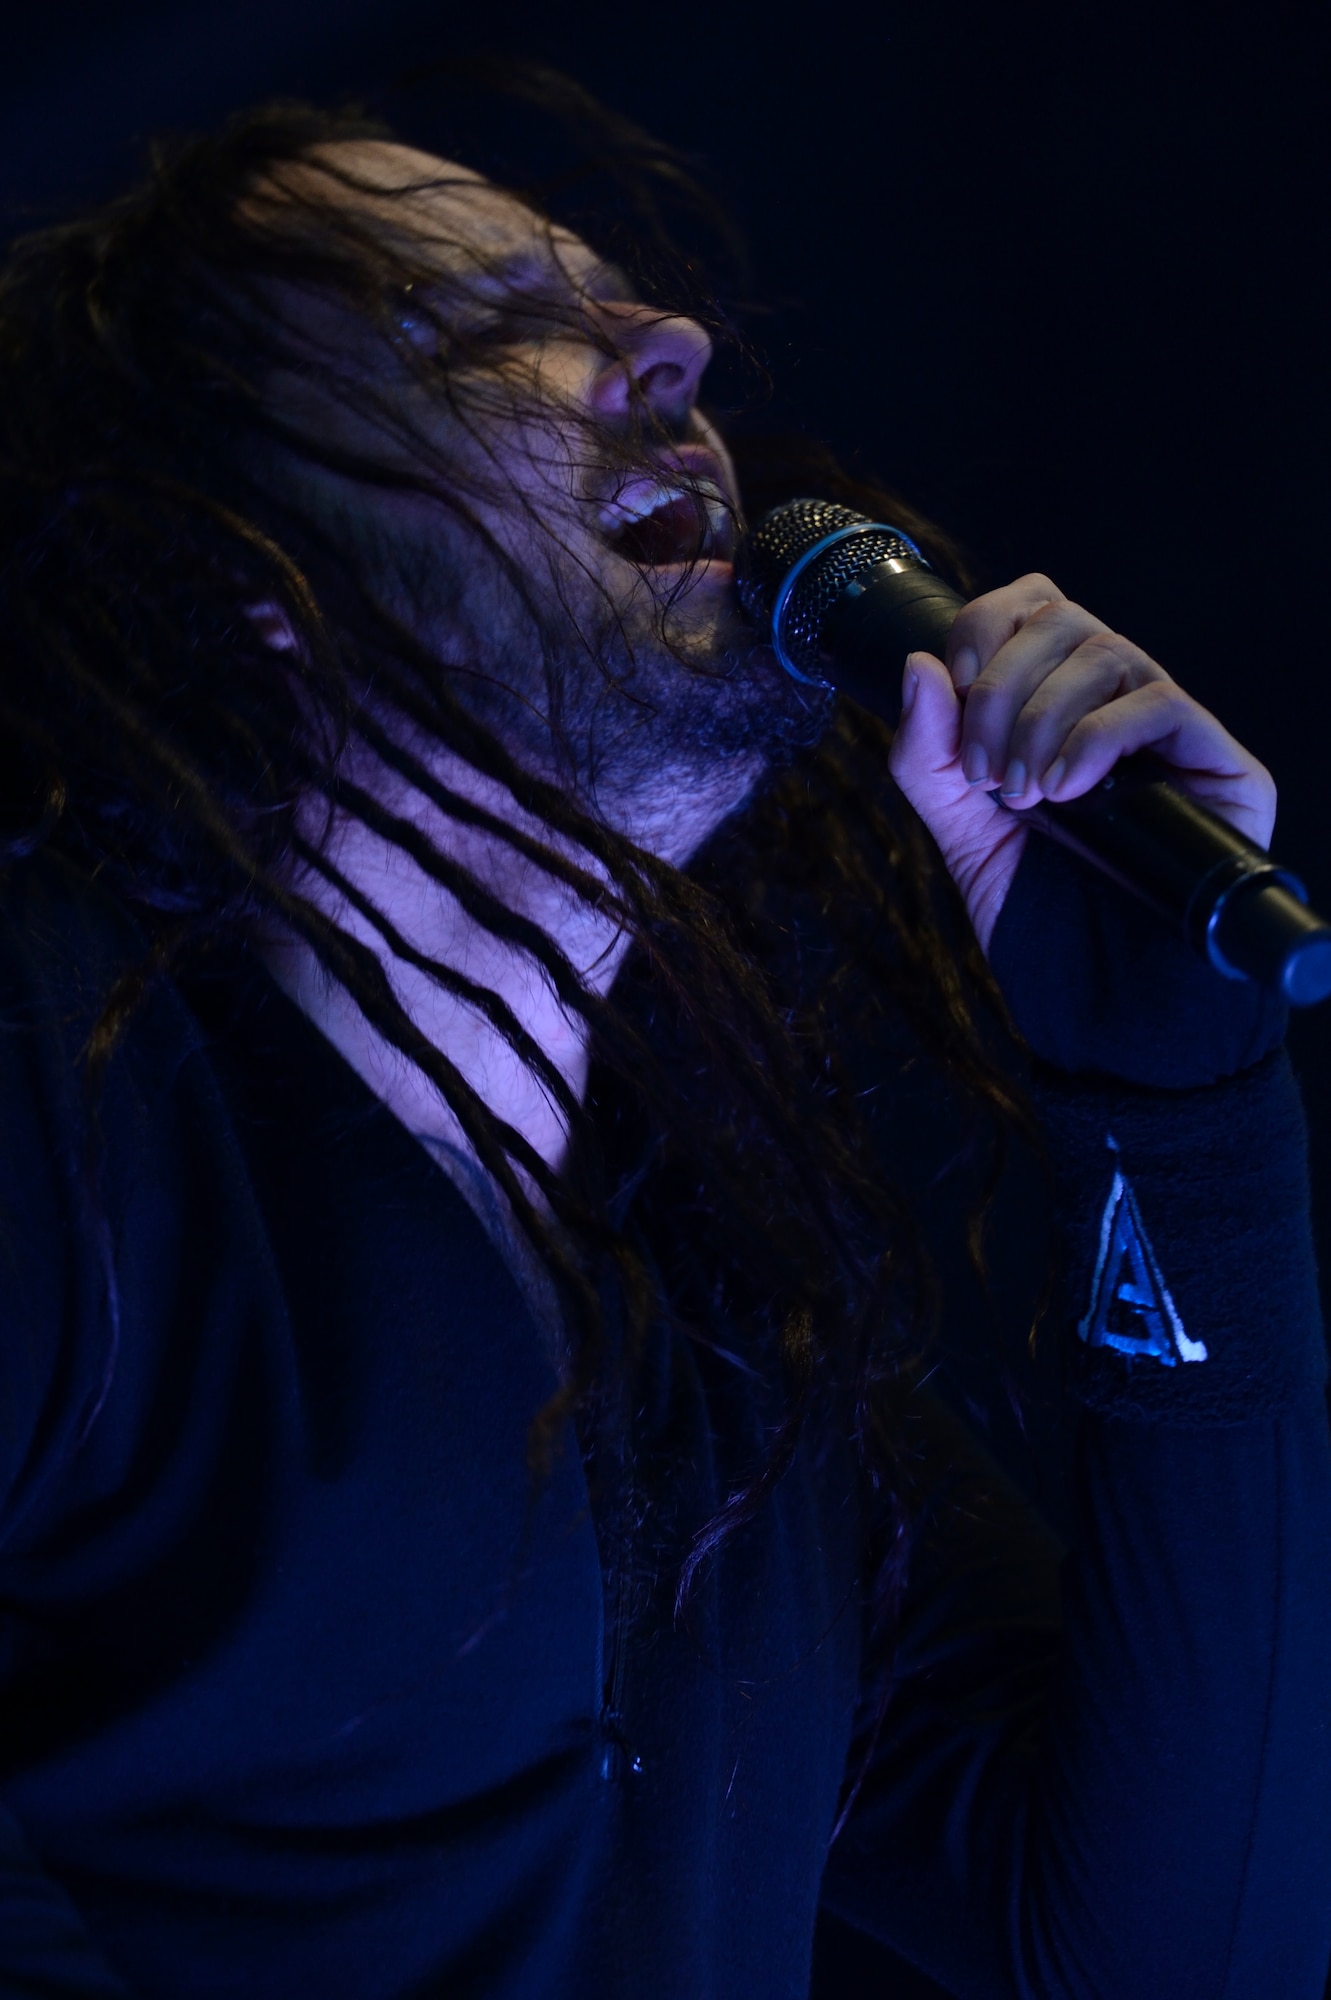 SPANGDAHLEM AIR BASE, Germany – Jonathan Davis, lead singer for the headlining band Korn, sings during a performance July 3, 2013. The bands Love and Death and Korn played a free concert for the Air Force community. (U.S. Air Force photo by Staff Sgt. Christopher Ruano)